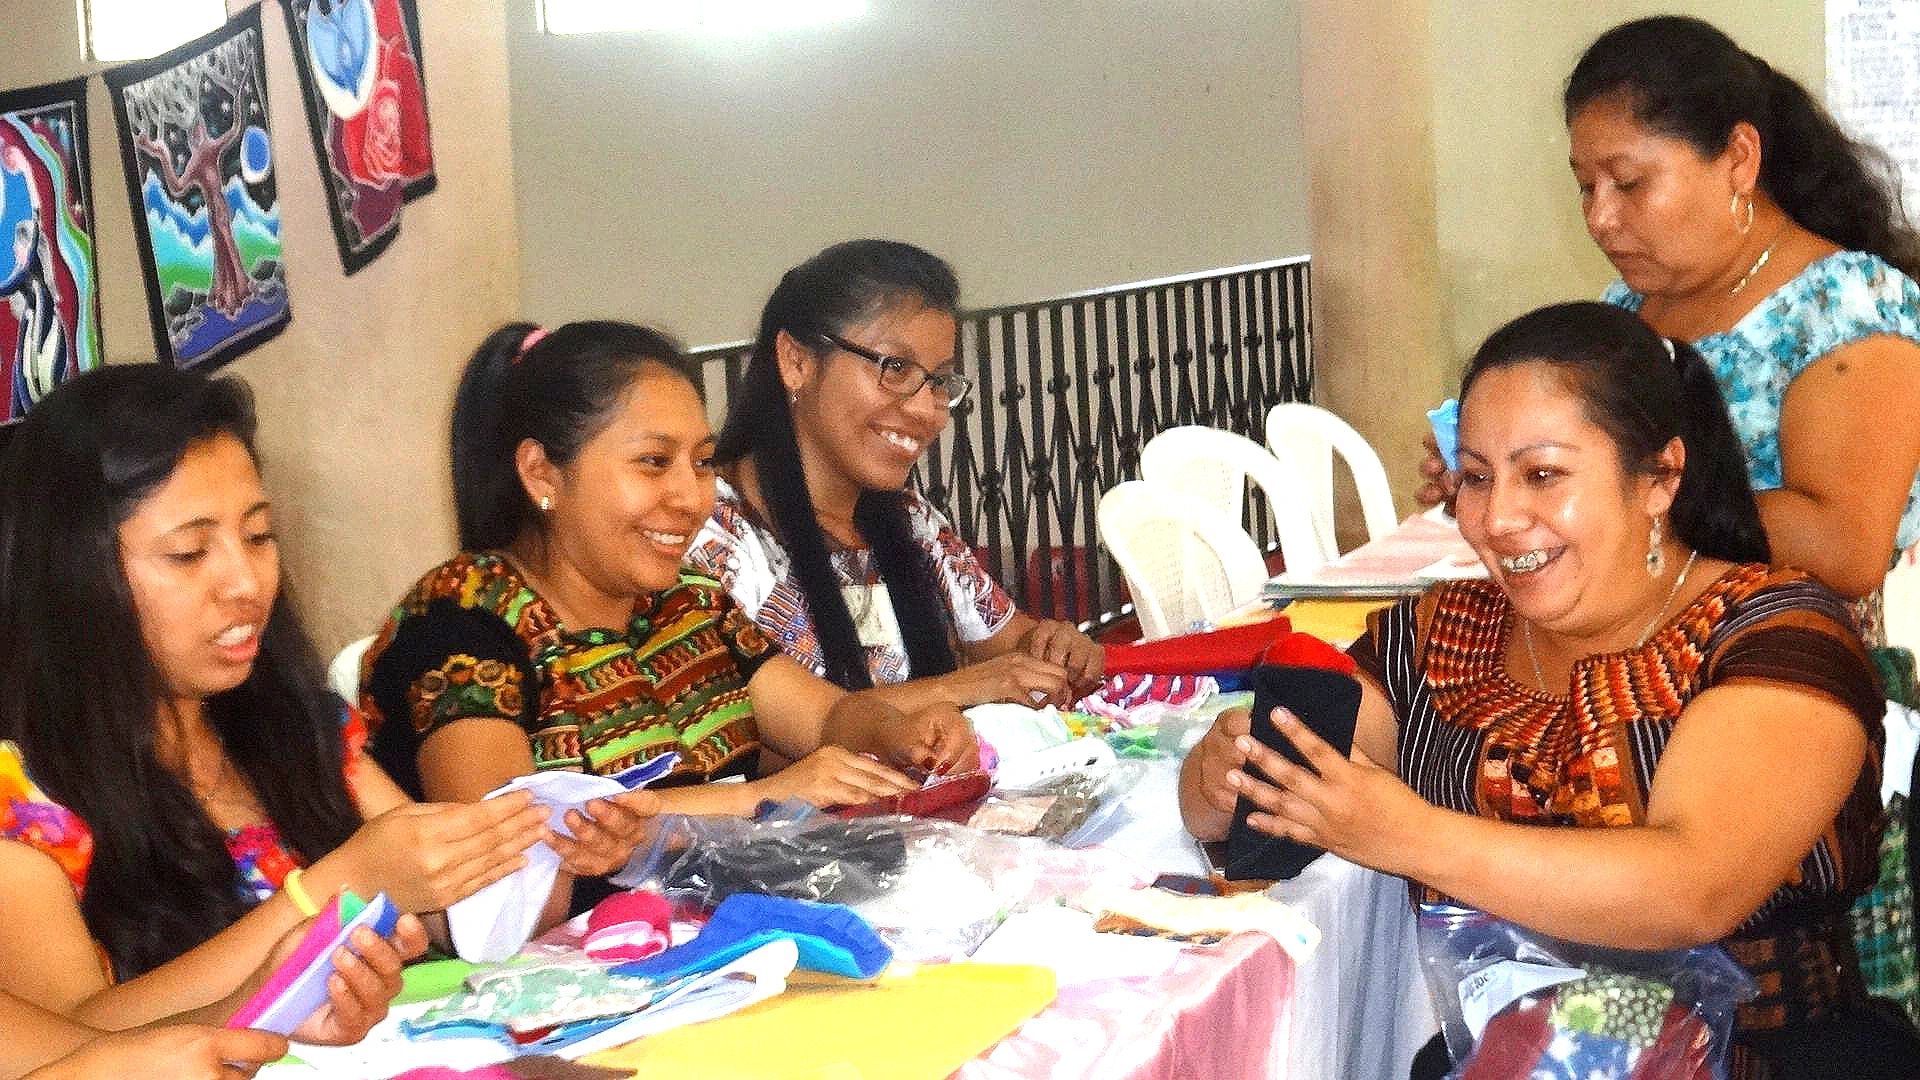 Women in Guatemala rejoice with the reusable cotton menstrual pads.